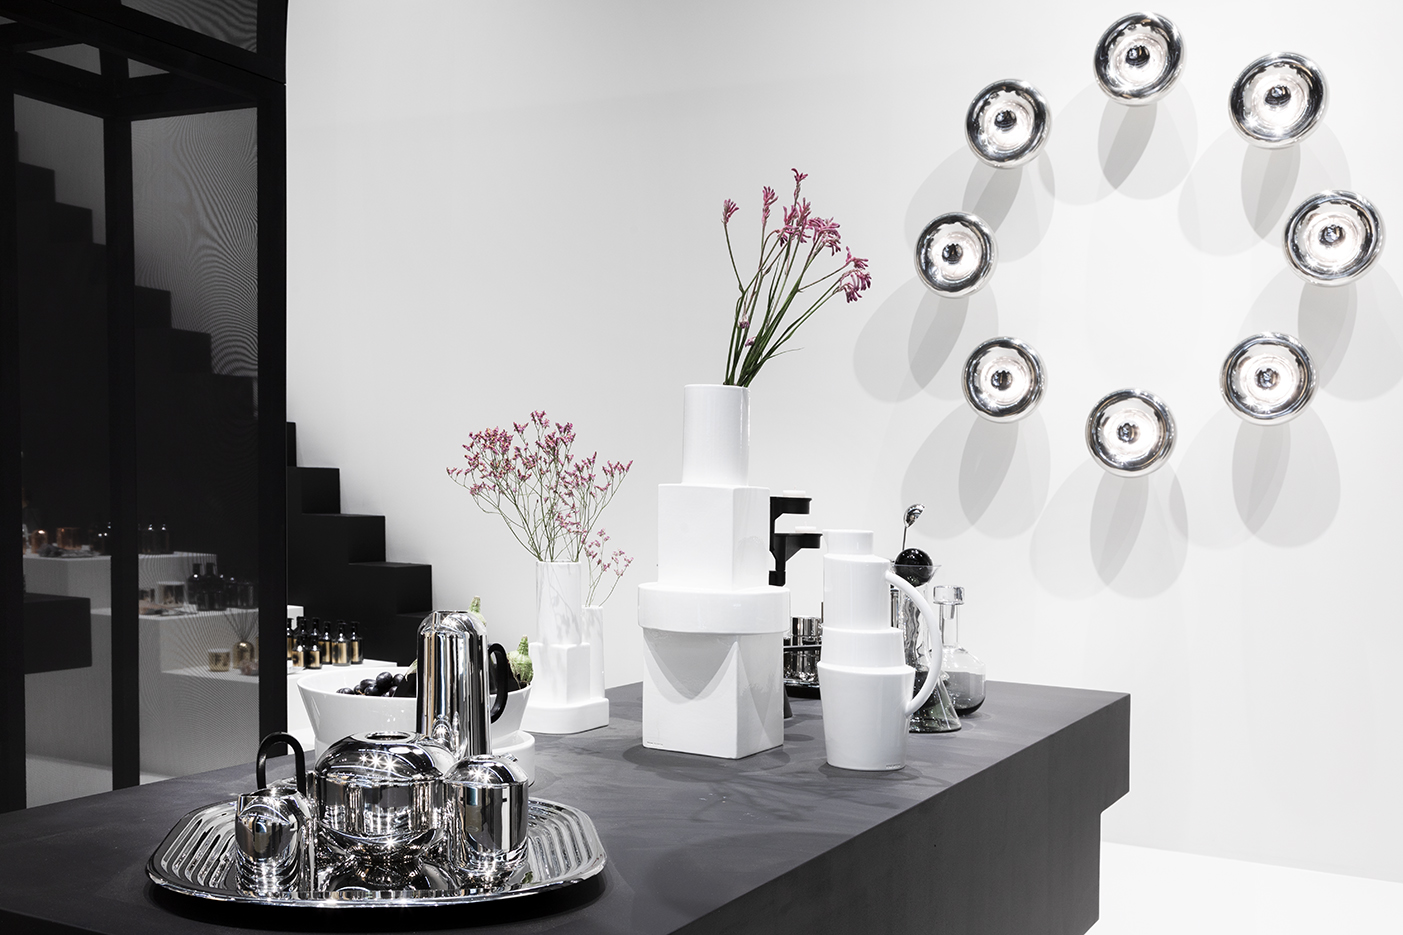 Tom Dixon showing new products at Frankfurt's Ambiente